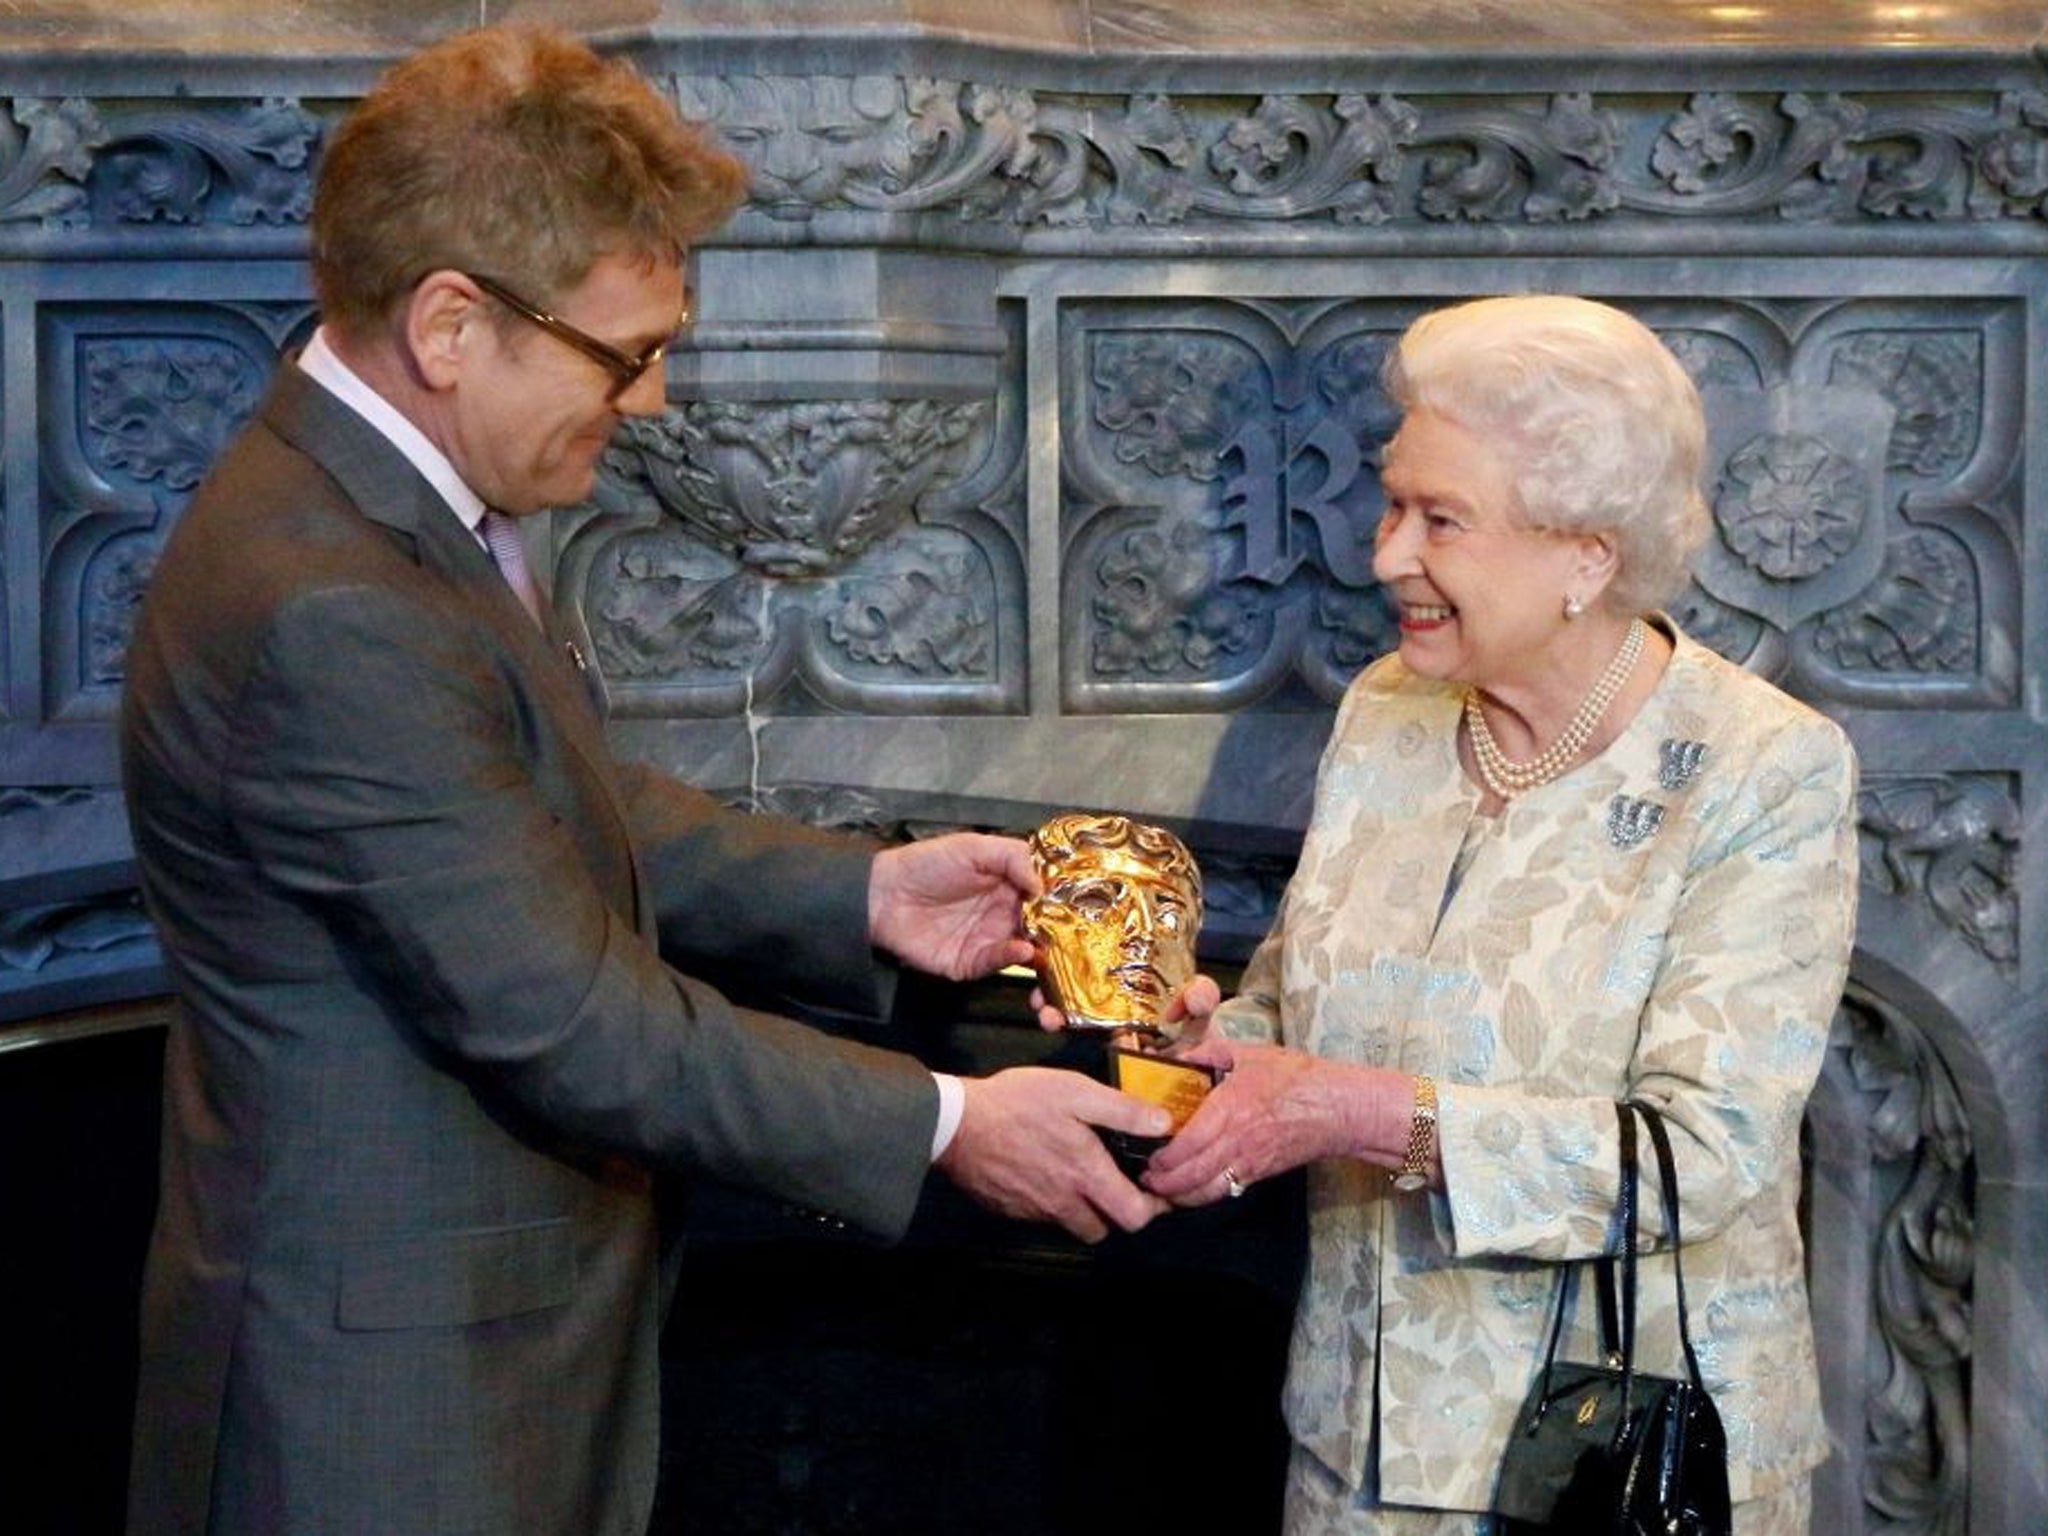 Sir Kenneth Branagh presents the Queen with her honorary Bafta award